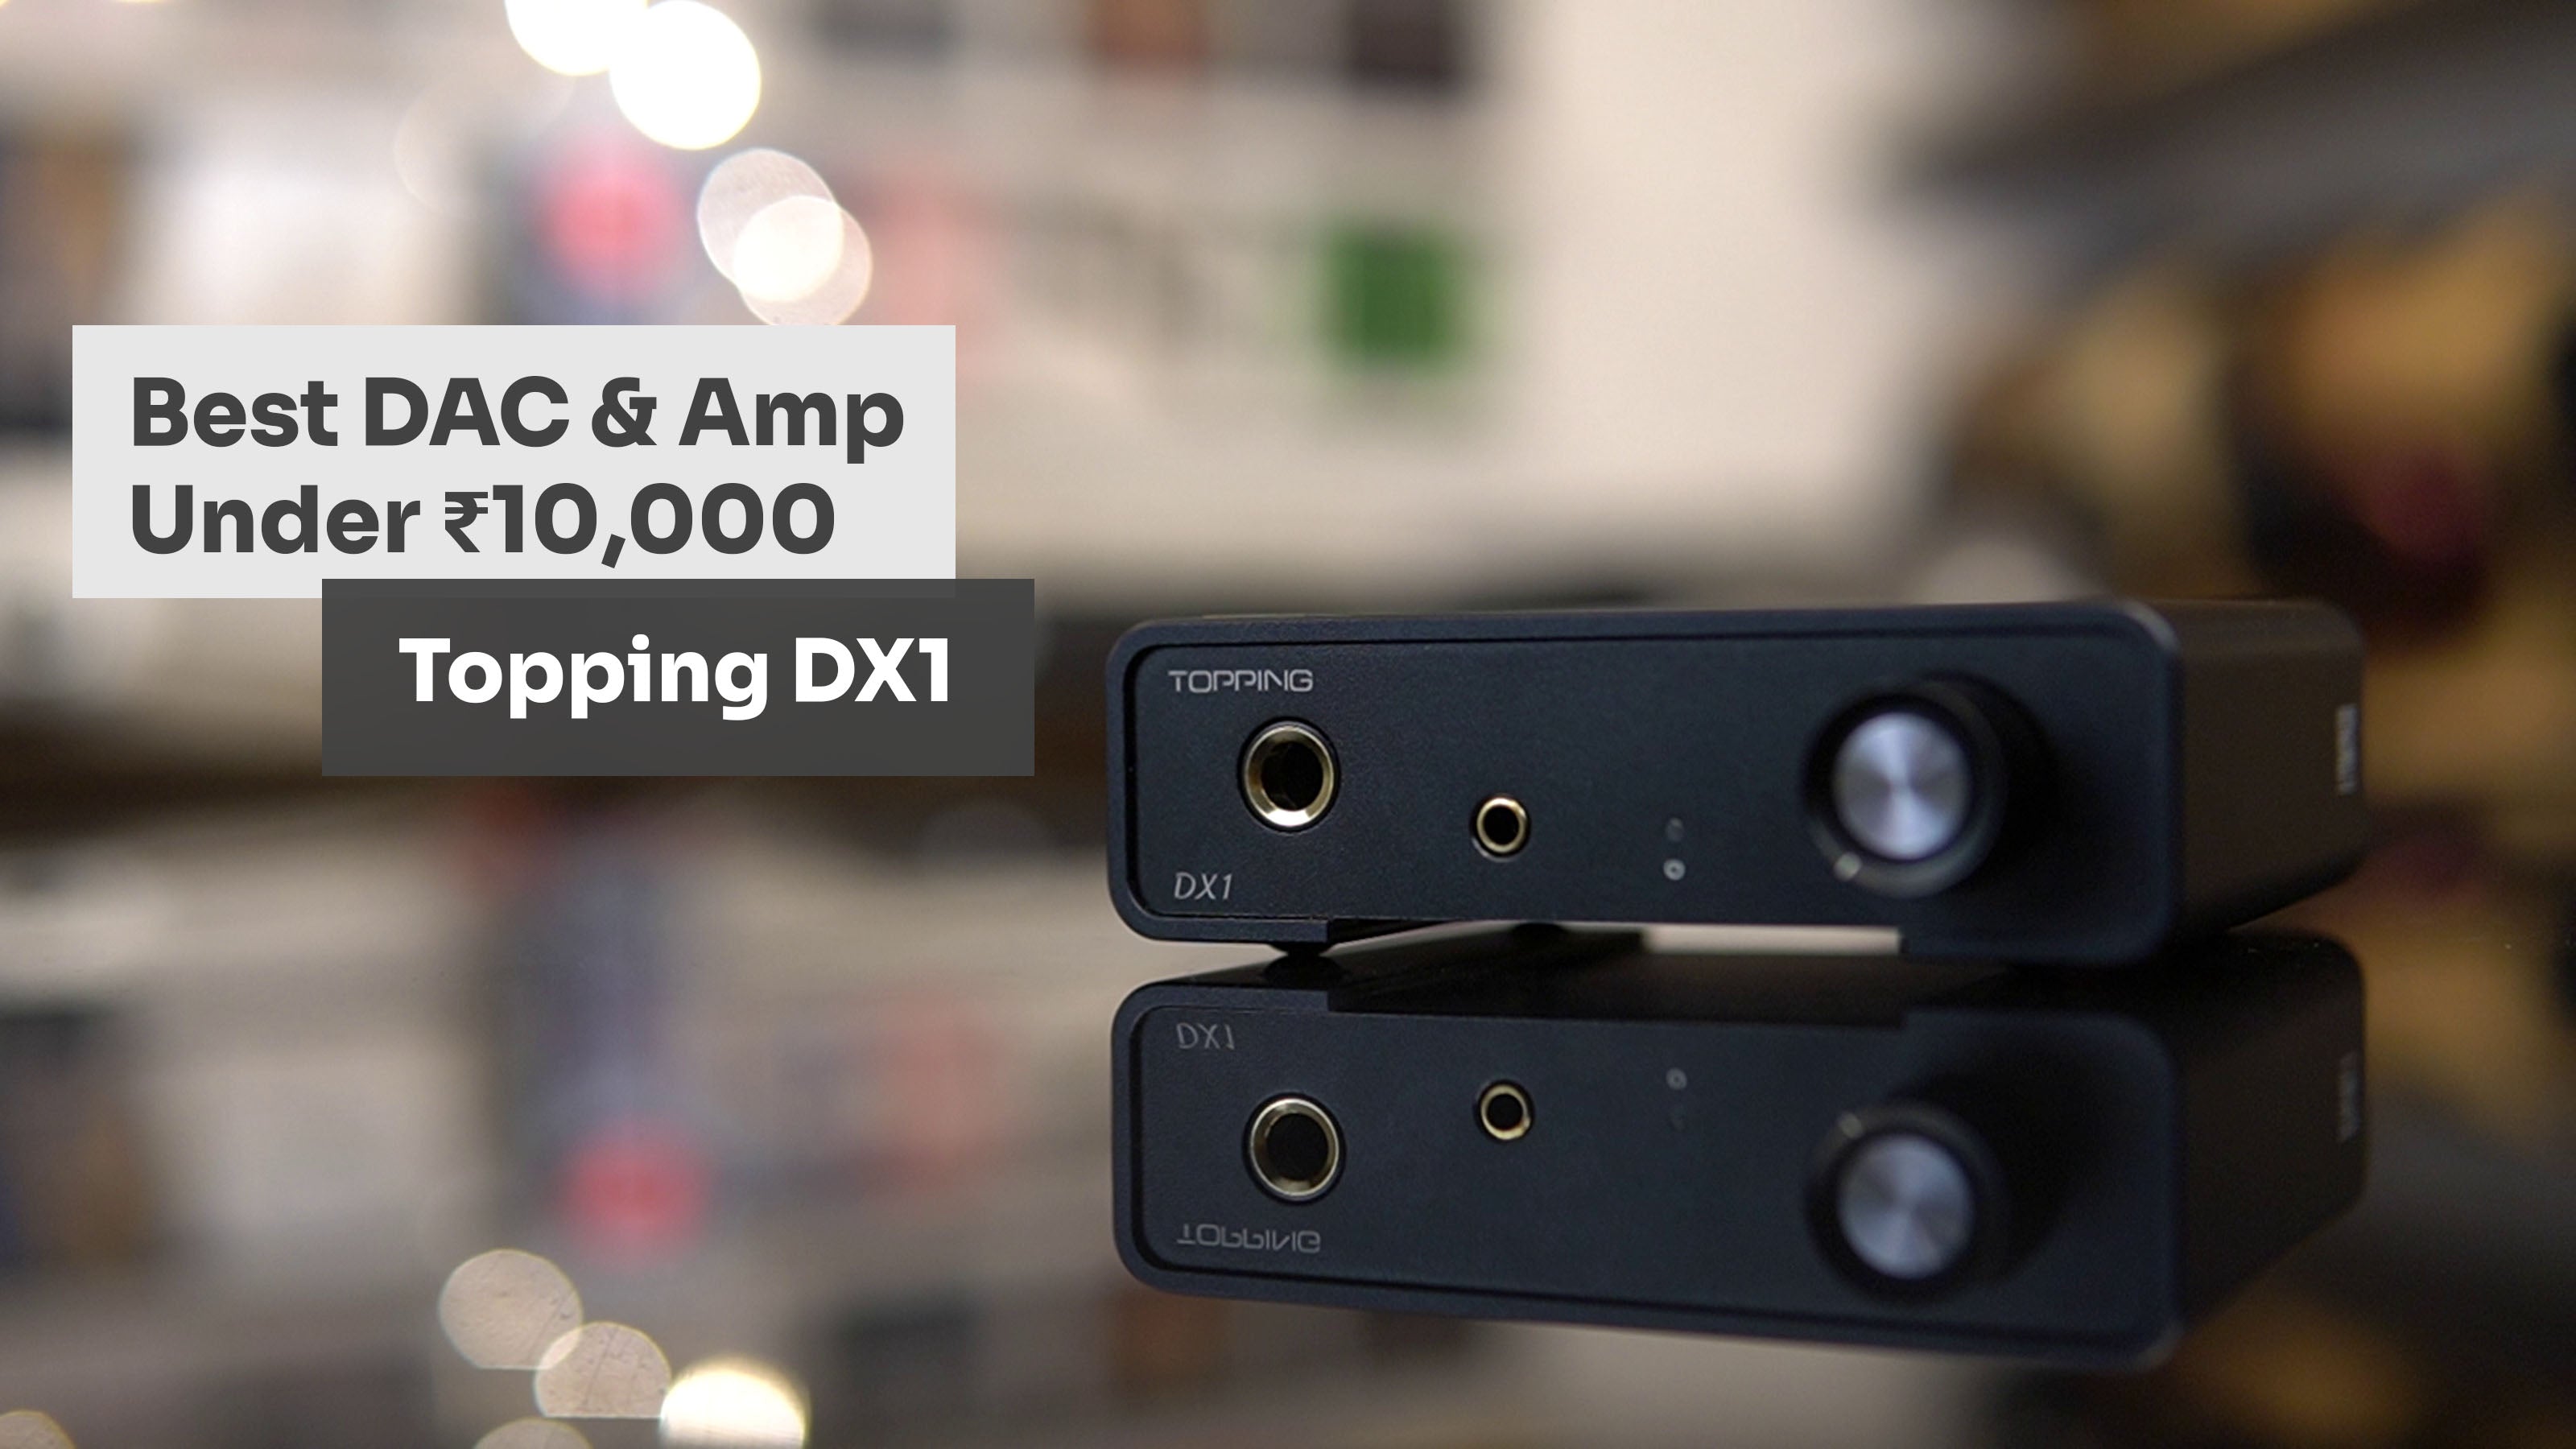 The best desktop DAC and Amp under ₹10,000 - Topping DX1